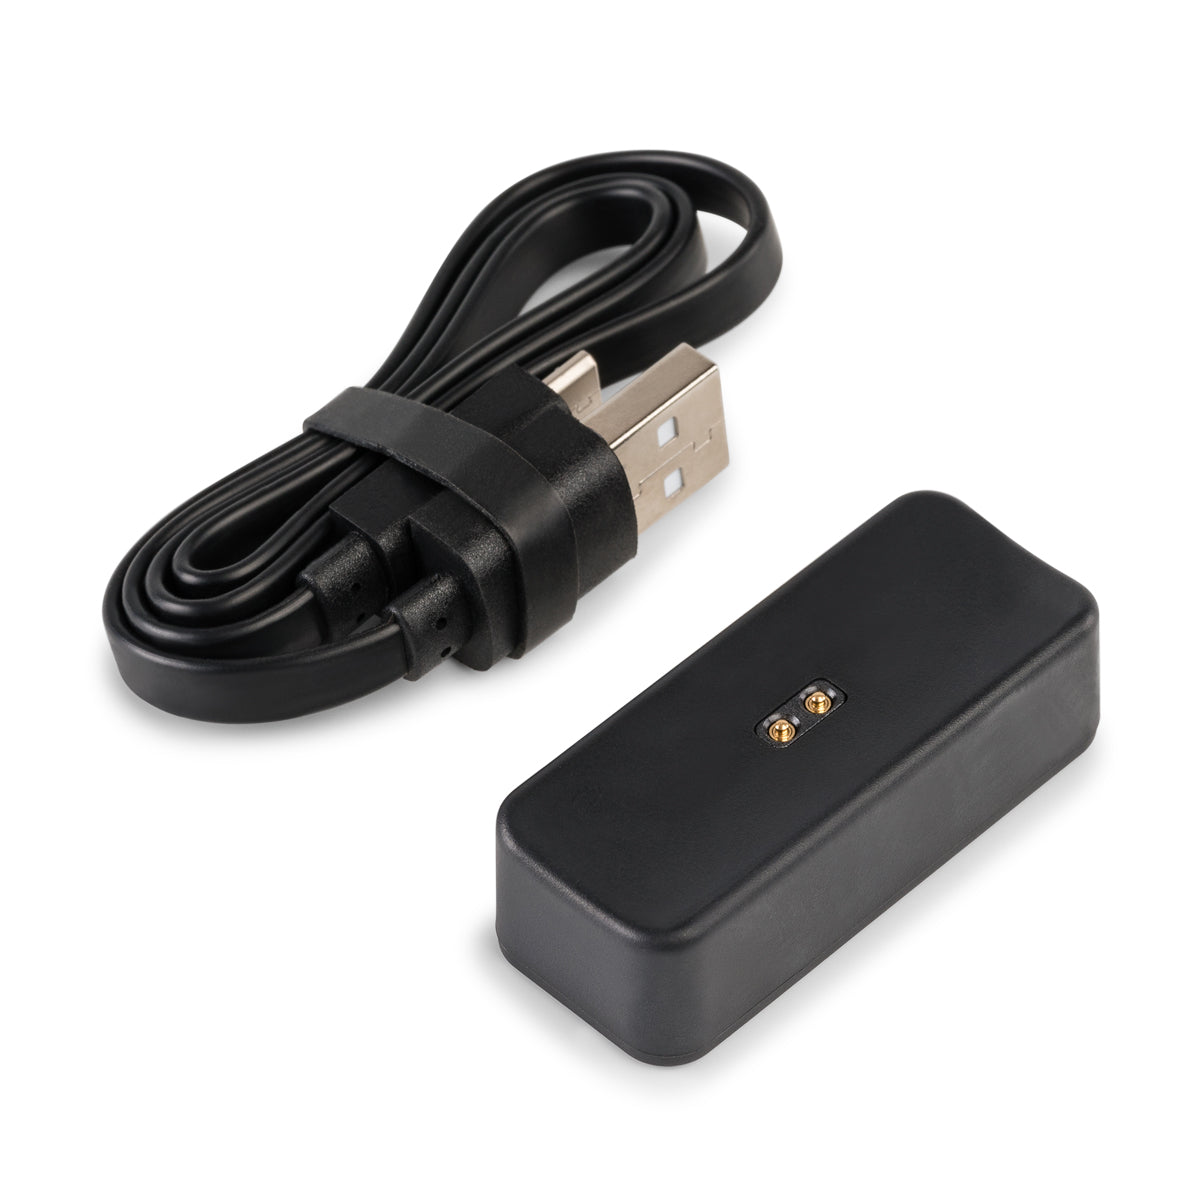 Pax 2/3 Replacement Mini Charger - SSG - $18.74